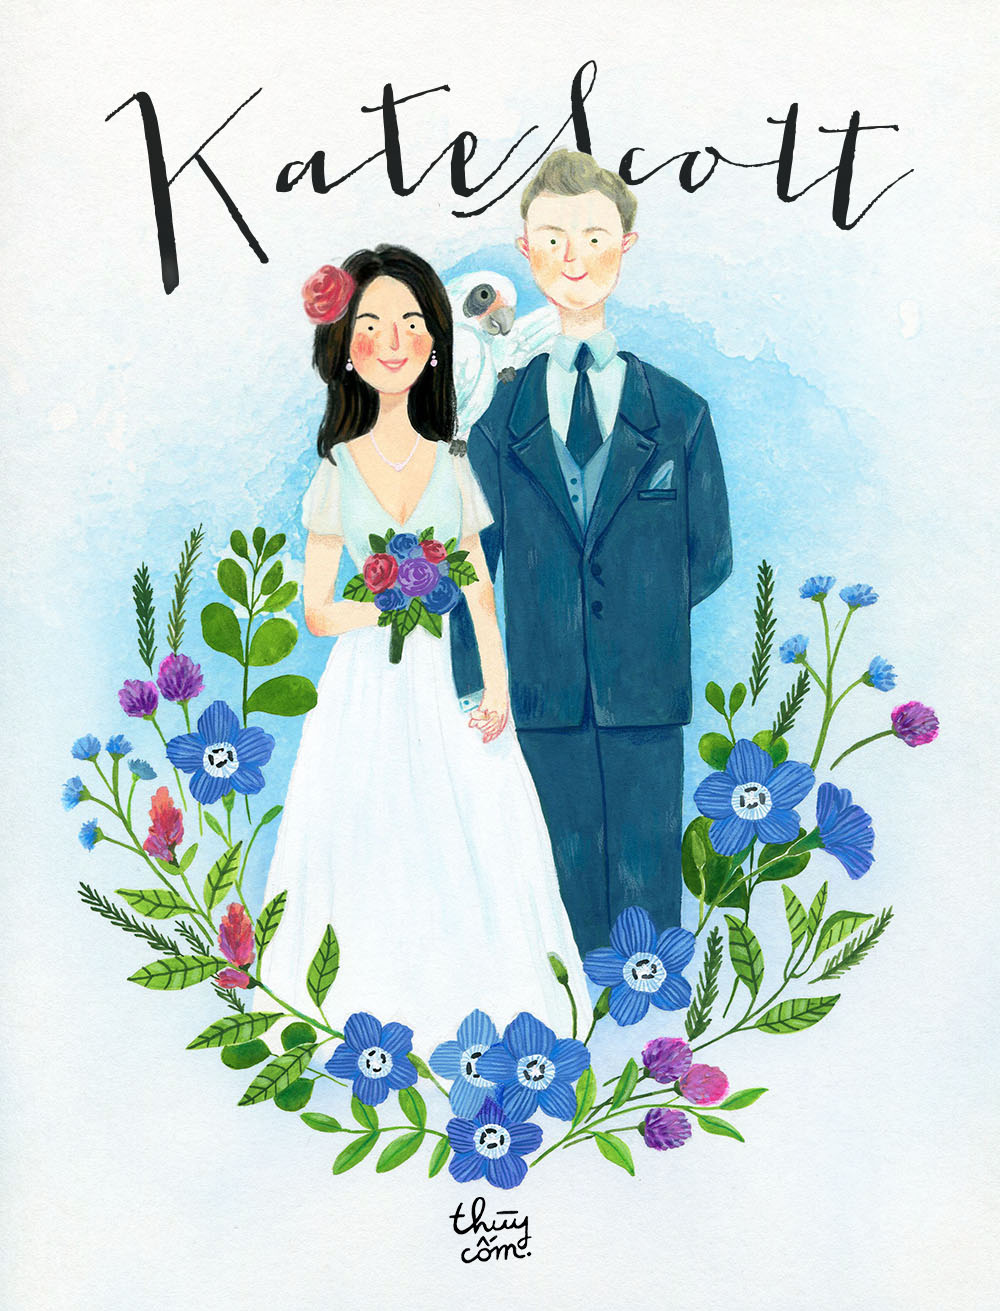 I take commission such as wedding invitation or portrait. The link to commission order form is on the sidebar.